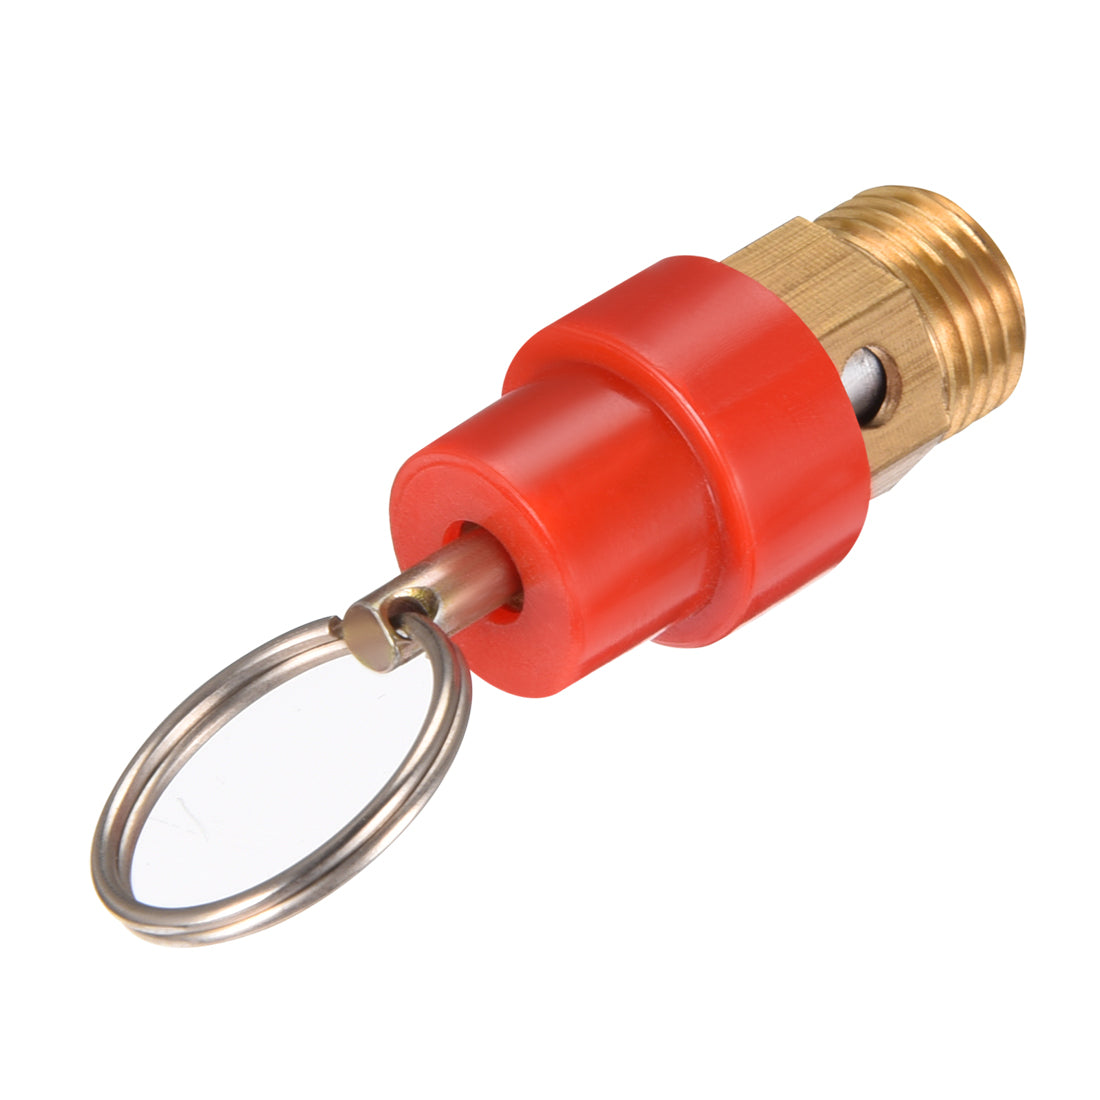 uxcell Uxcell 1/4 BSP Thread Pressure Relief Valve for Air Compressor 0.5Mpa Red Gold Tone w Split Ring